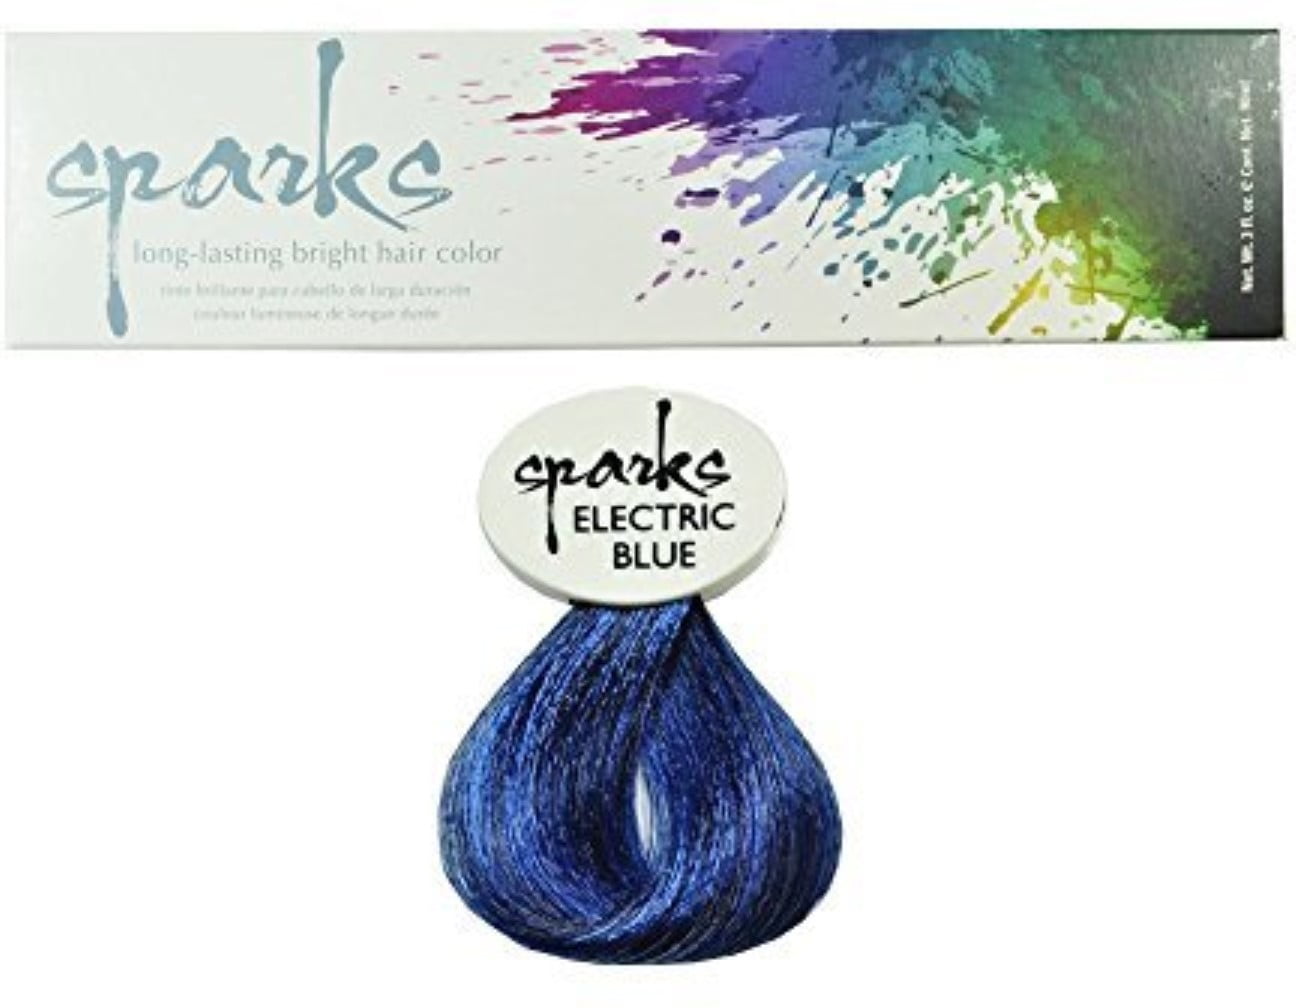 Sparks Long Lasting Bright Hair Color, Electric Blue - wide 1